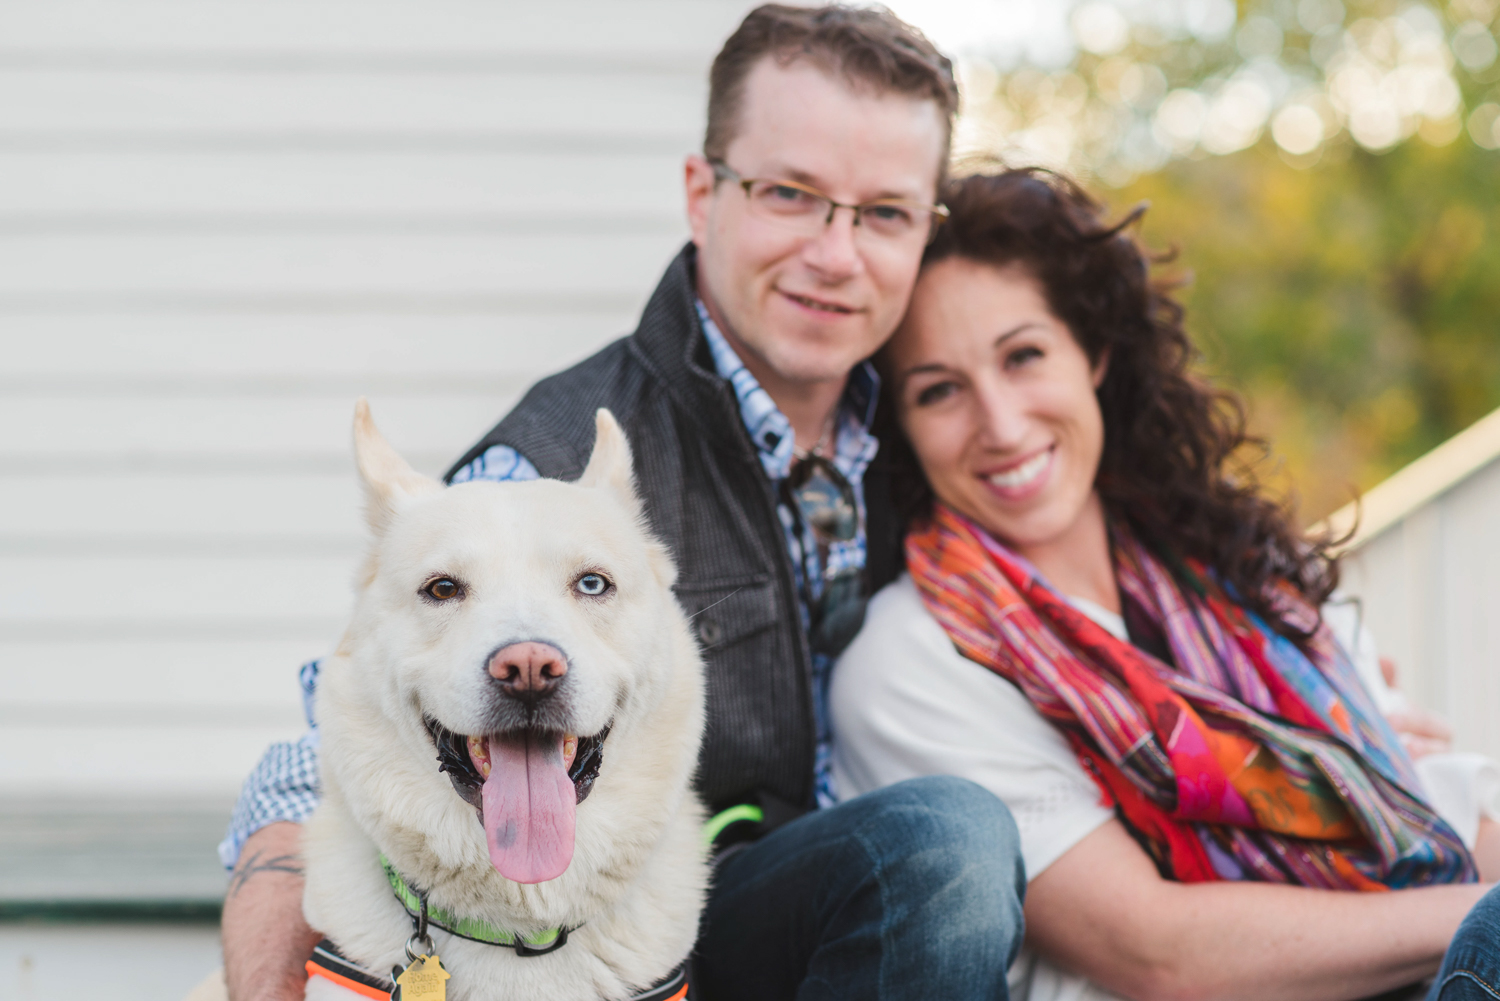 Engagement photo with dog | Pets In Human Photo Session